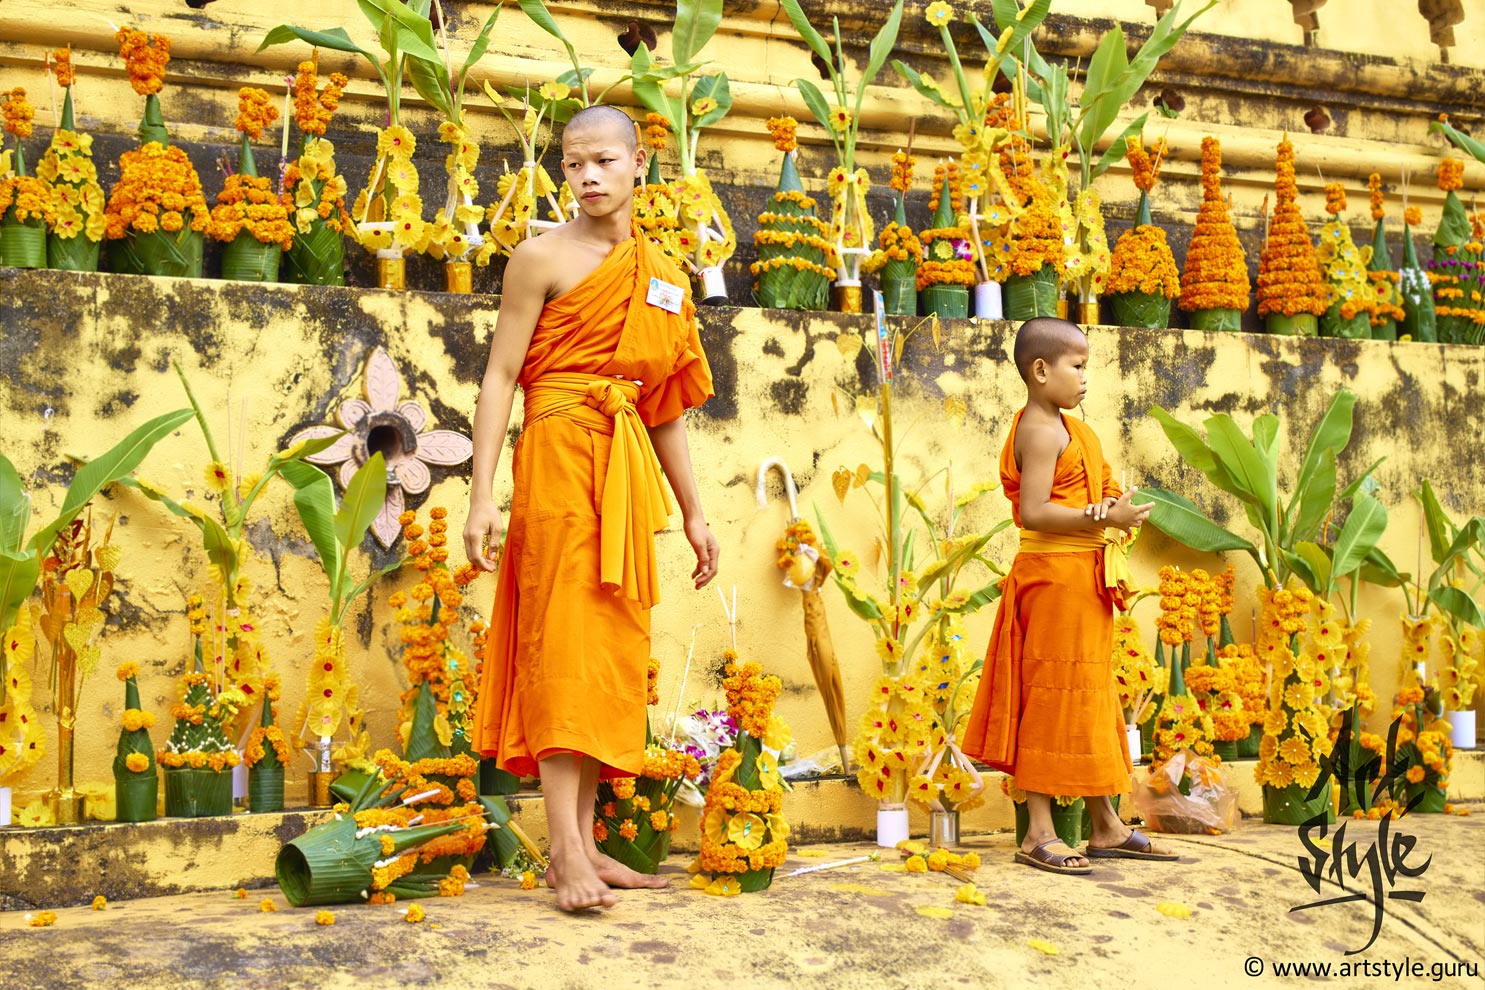 Yong monks help elder to collect offering of parishioners during Pha That Luang Festival, Pha That Luang, Vientiane, Laos.